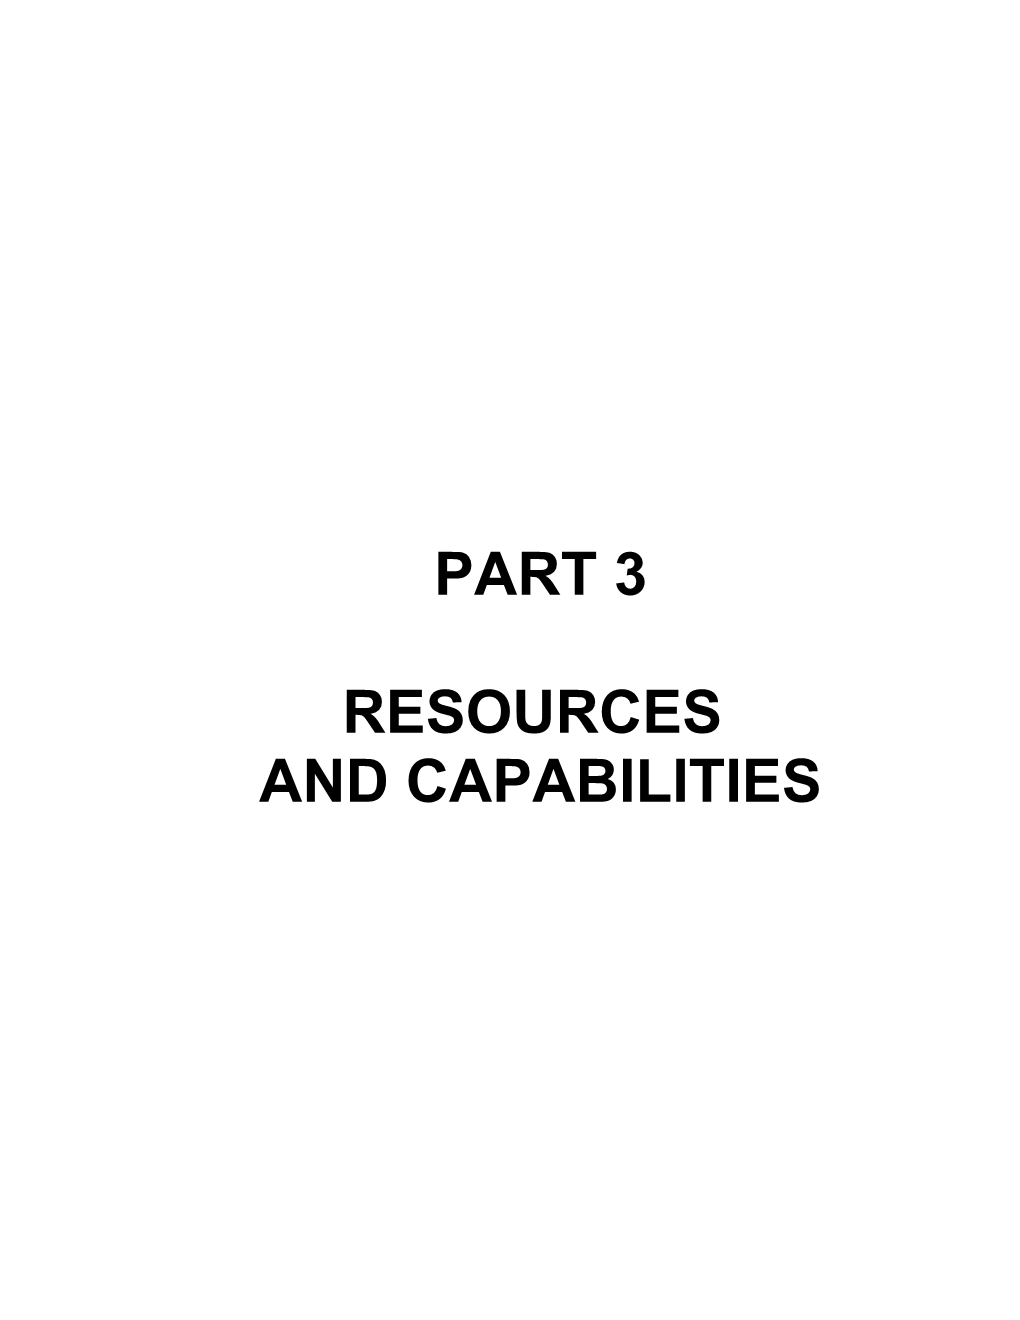 2017 Municipal Emergency Plan Part 3 Resources and Capabilities 1